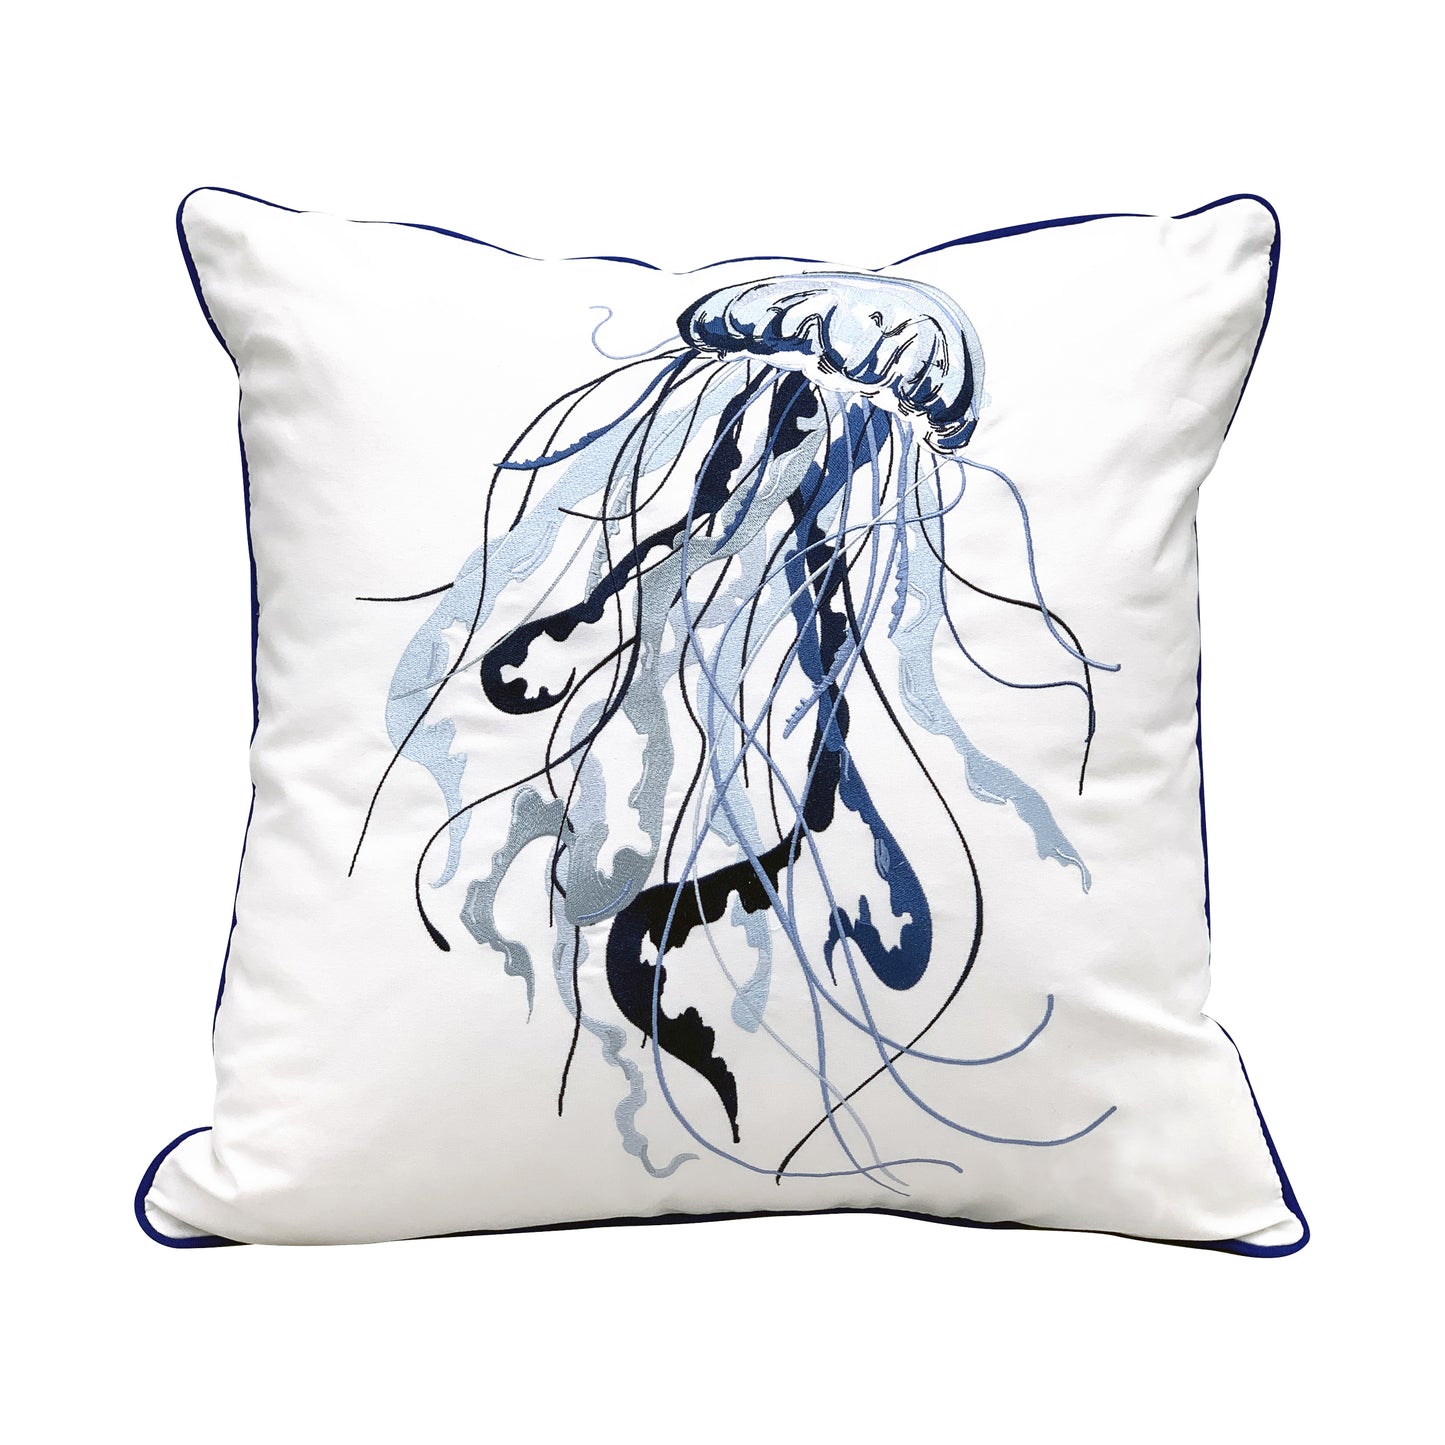 Navy, light blue, and gray jellyfish embroidered on a white ground pillow with navy edged piping.